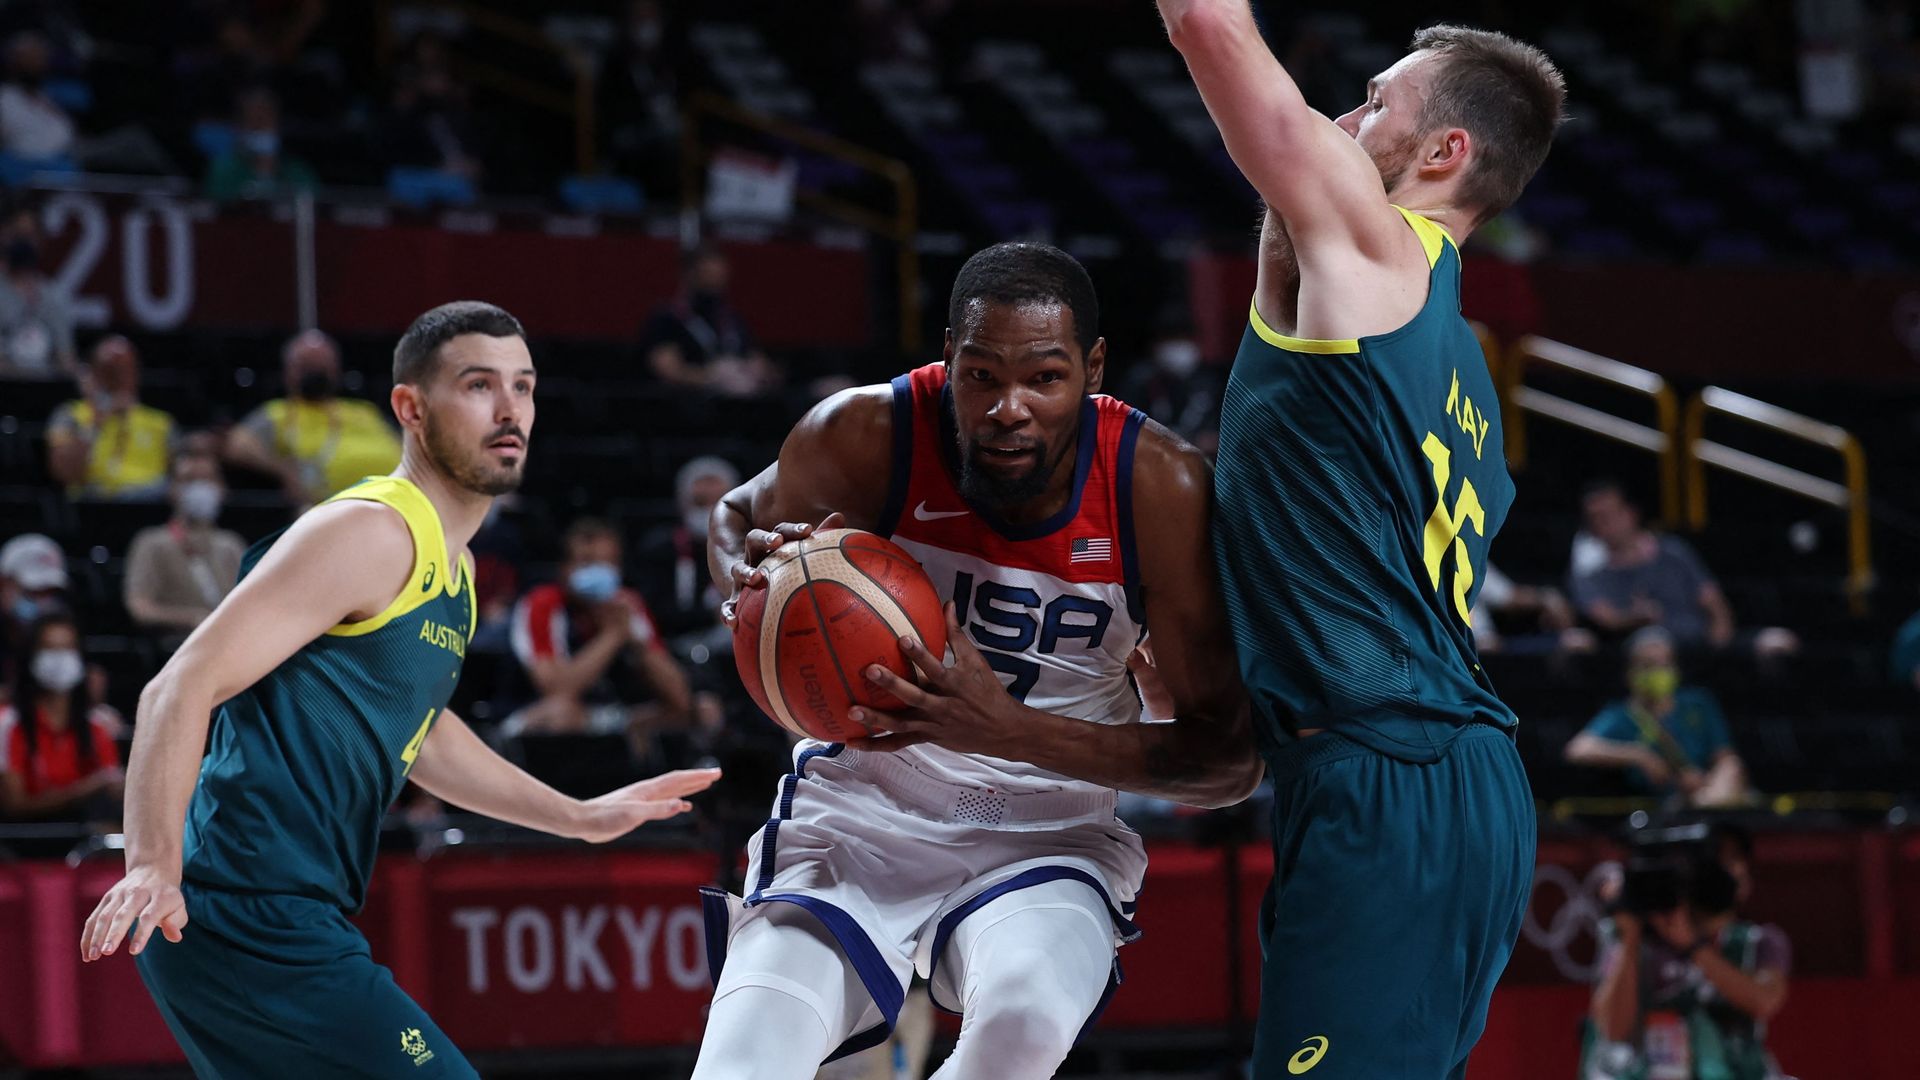  USA's Kevin Wayne Durant (C) runs with the ball past Australia's Chris Goulding (L) and Nic Kay in the men's semi-final basketball match between Australia and USA 